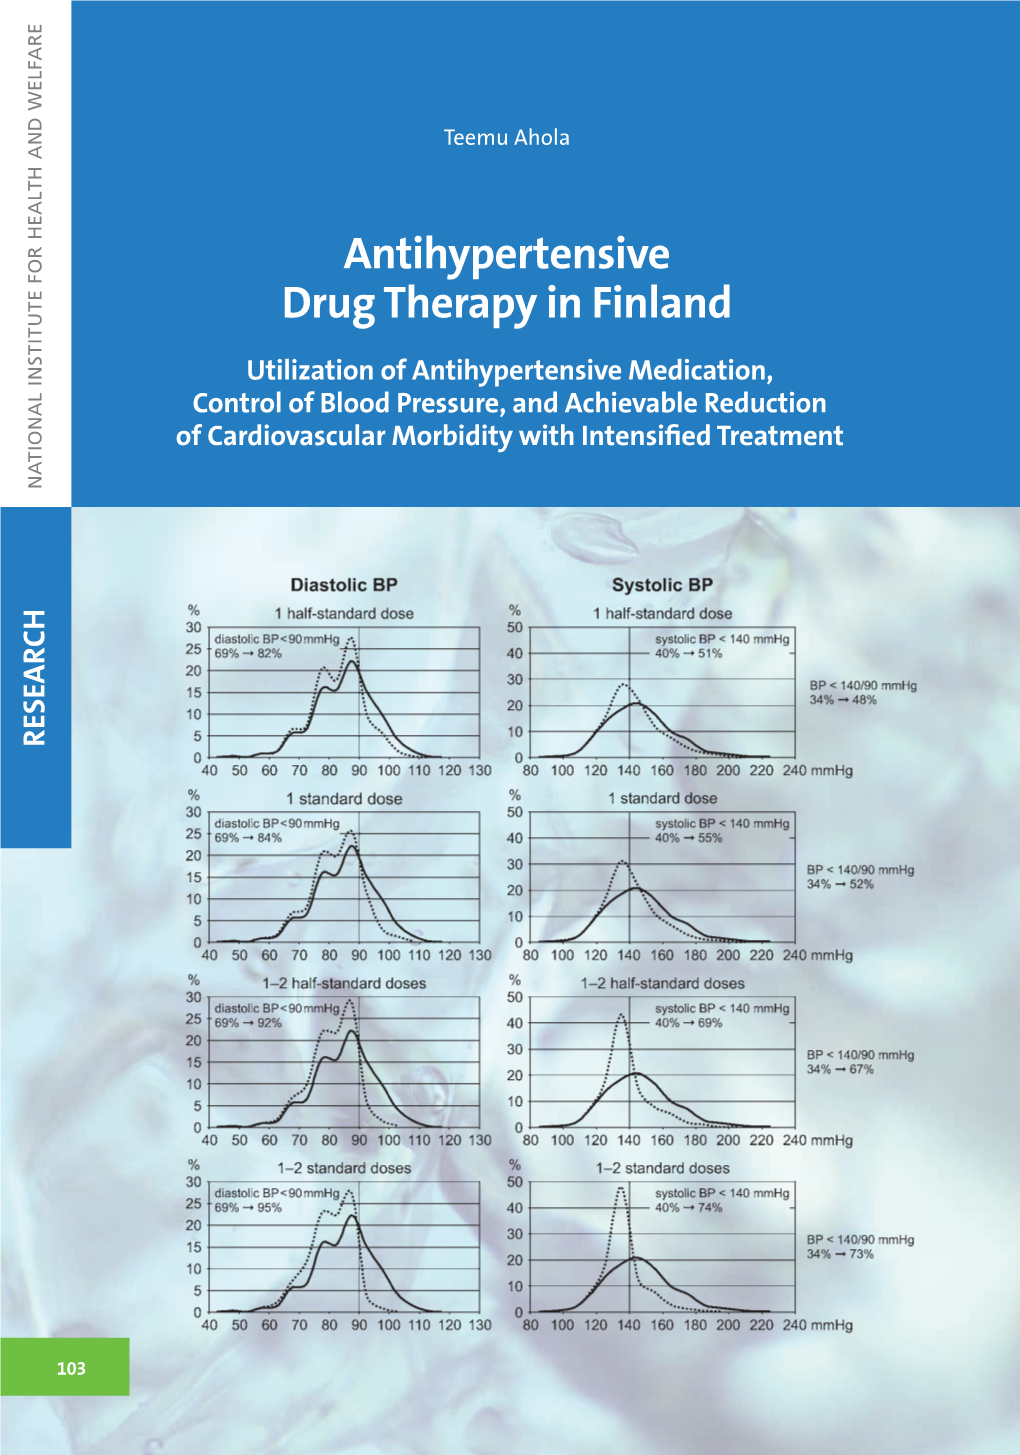 Antihypertensive Drug Therapy in Finland